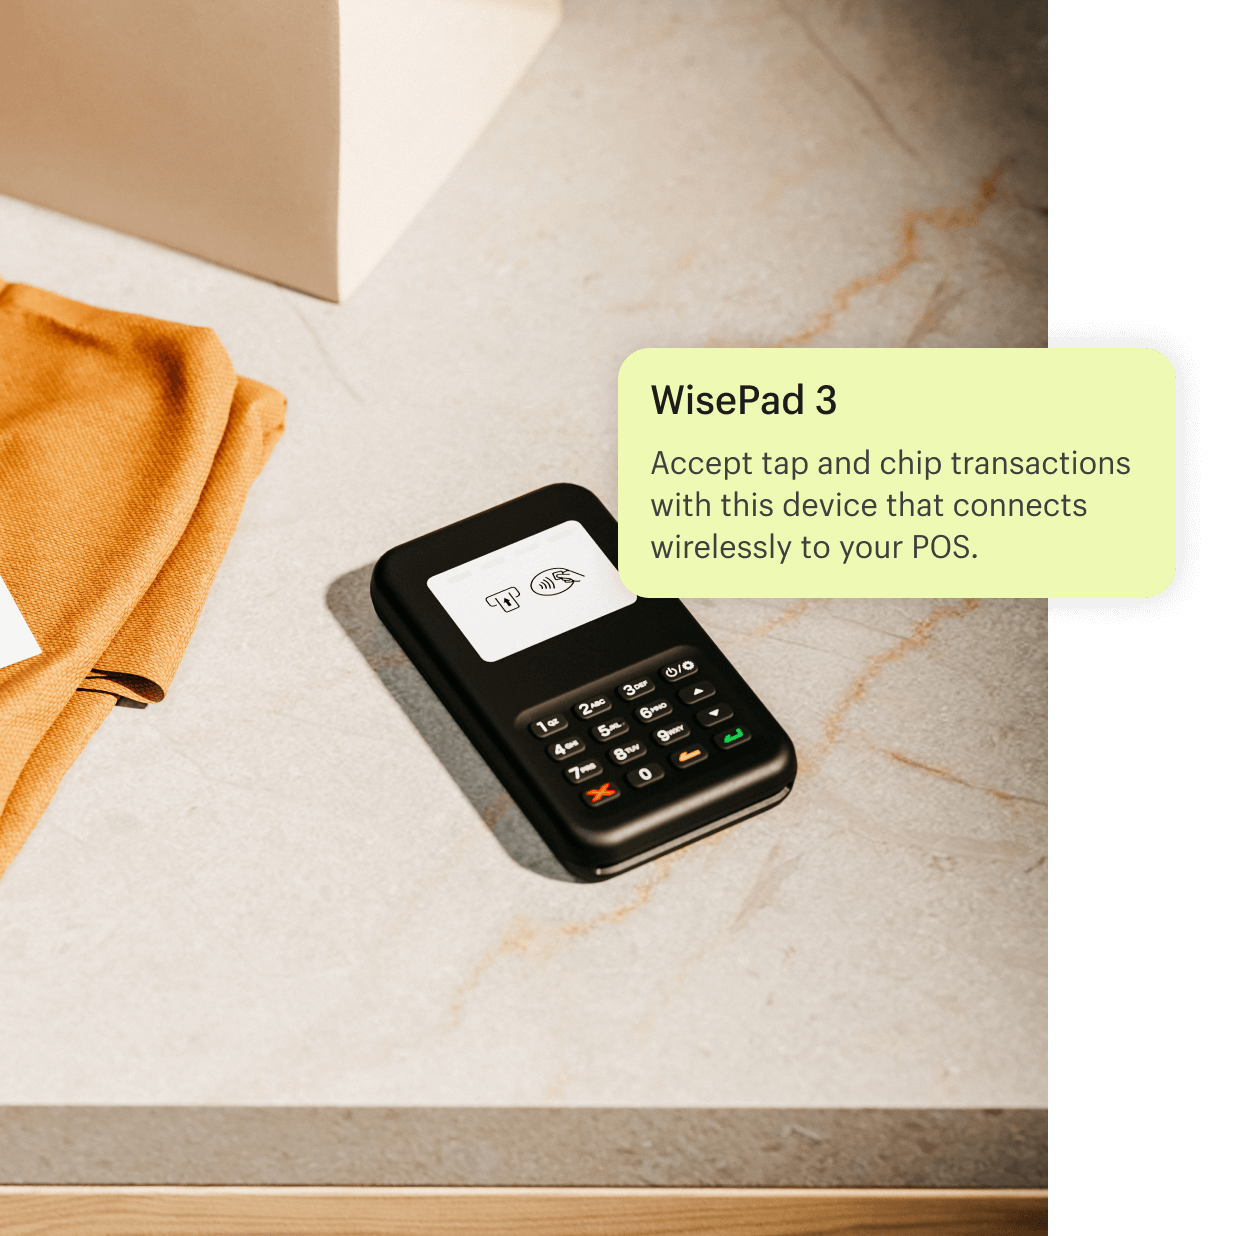 An image of the WisePad 3 device placed on a counter after completing a transaction with a customer. WisePad 3 accepts tap and chip transactions with this device that connects wirelessly to your POS.